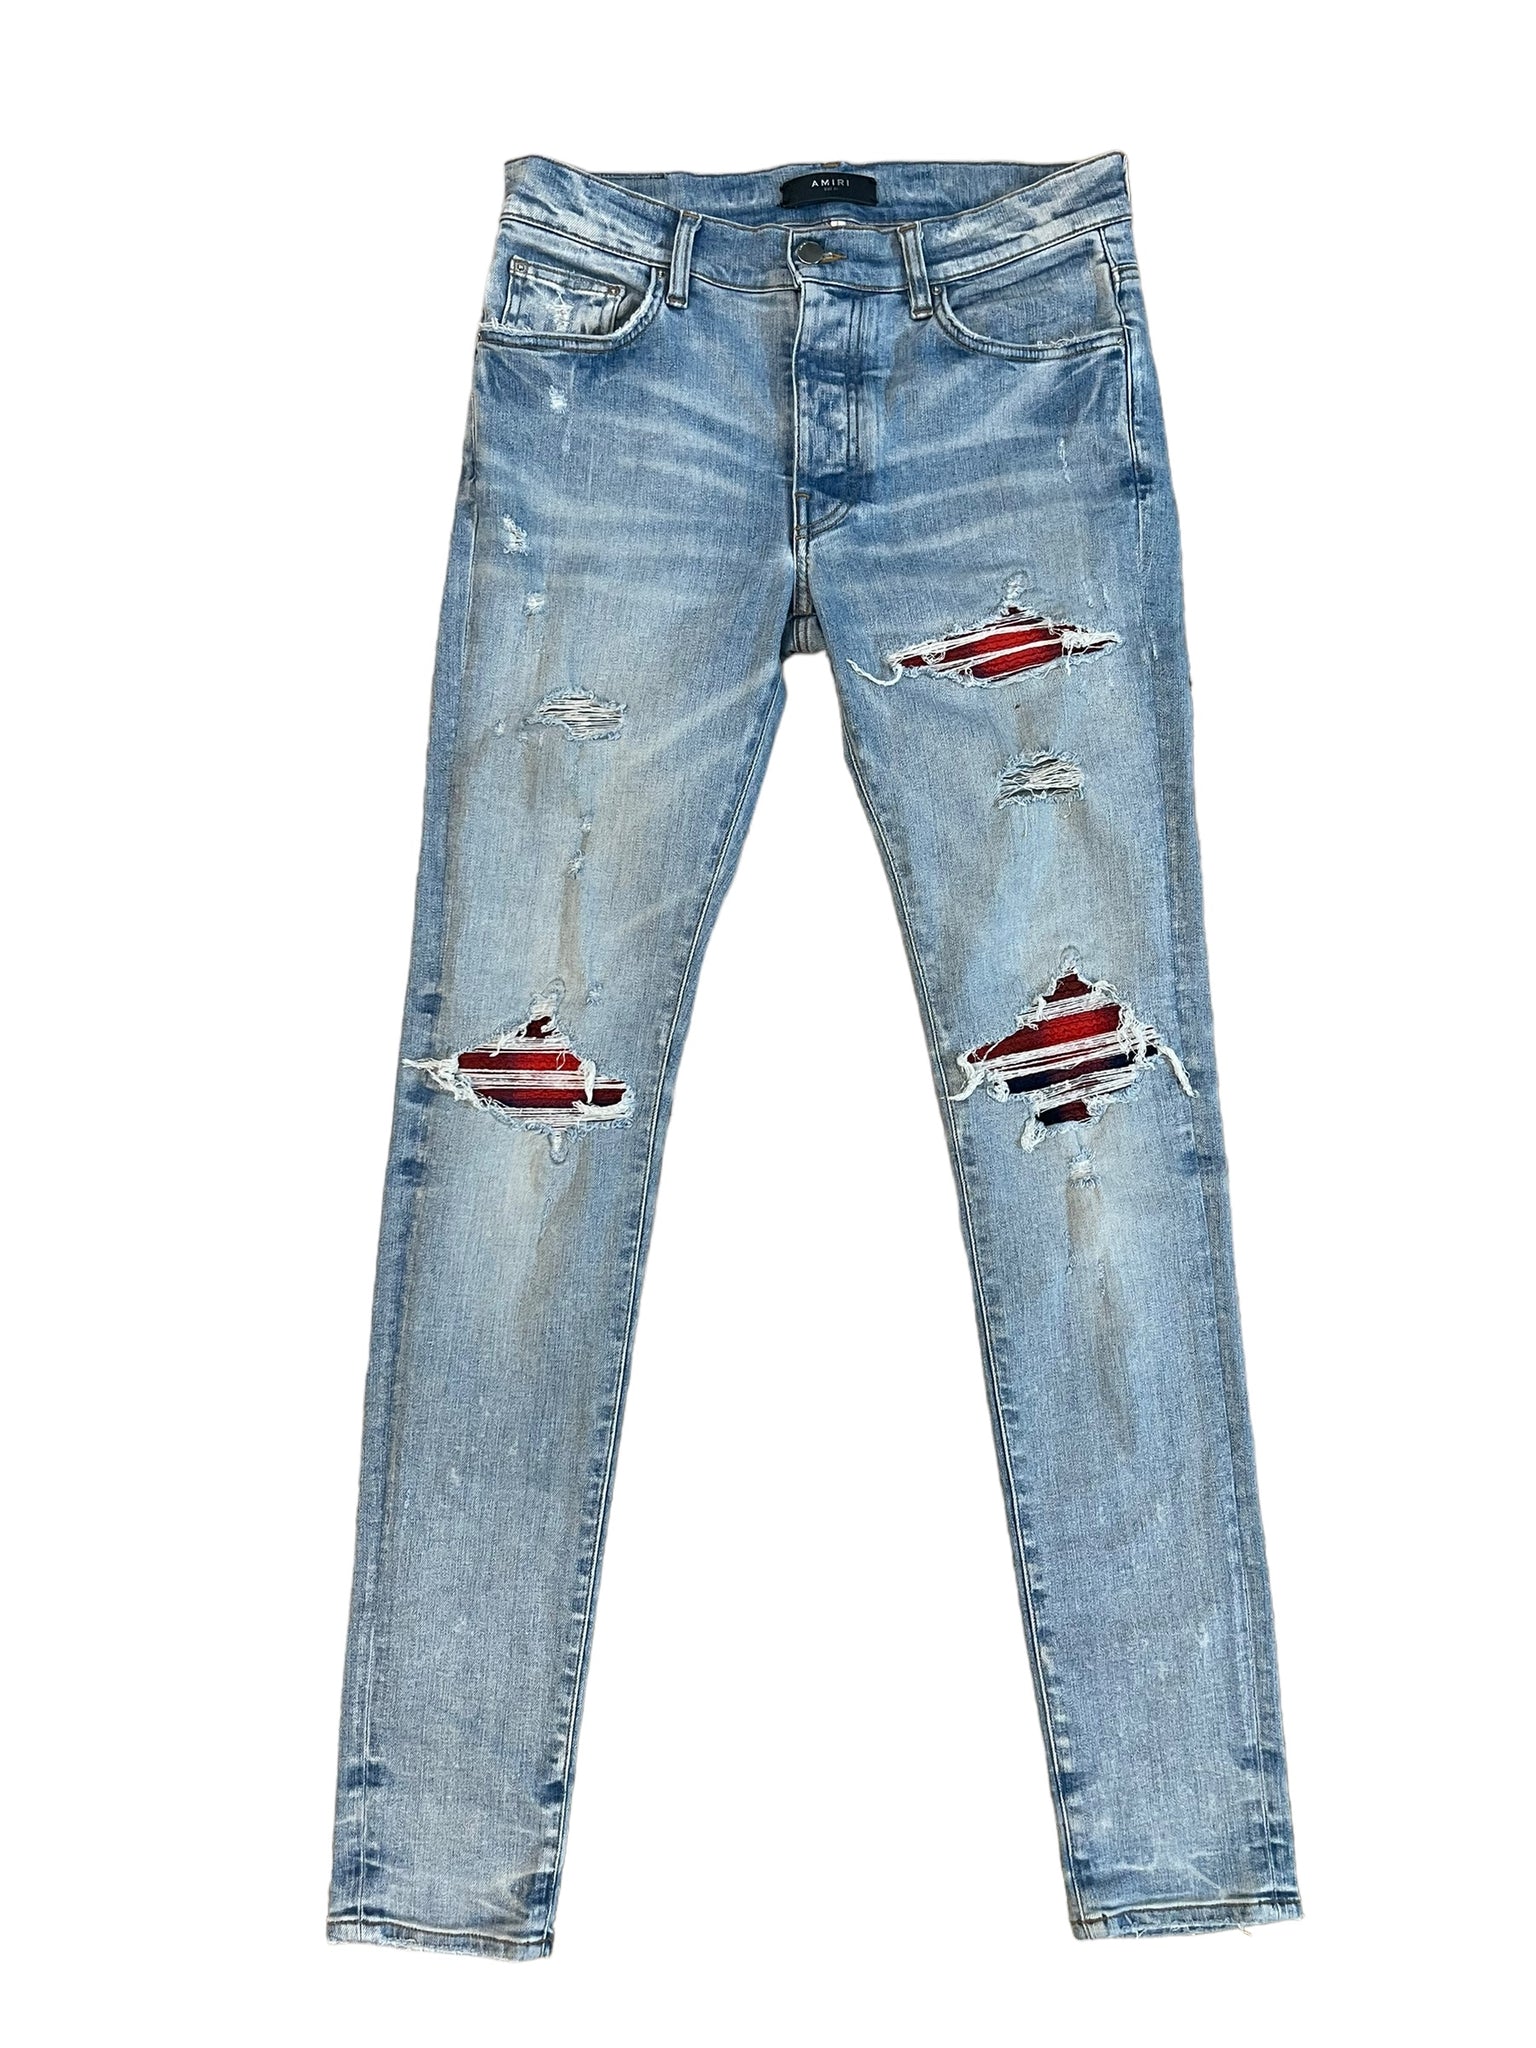 Amiri MX1 Red Dyed Patch Jeans "Lightwash"